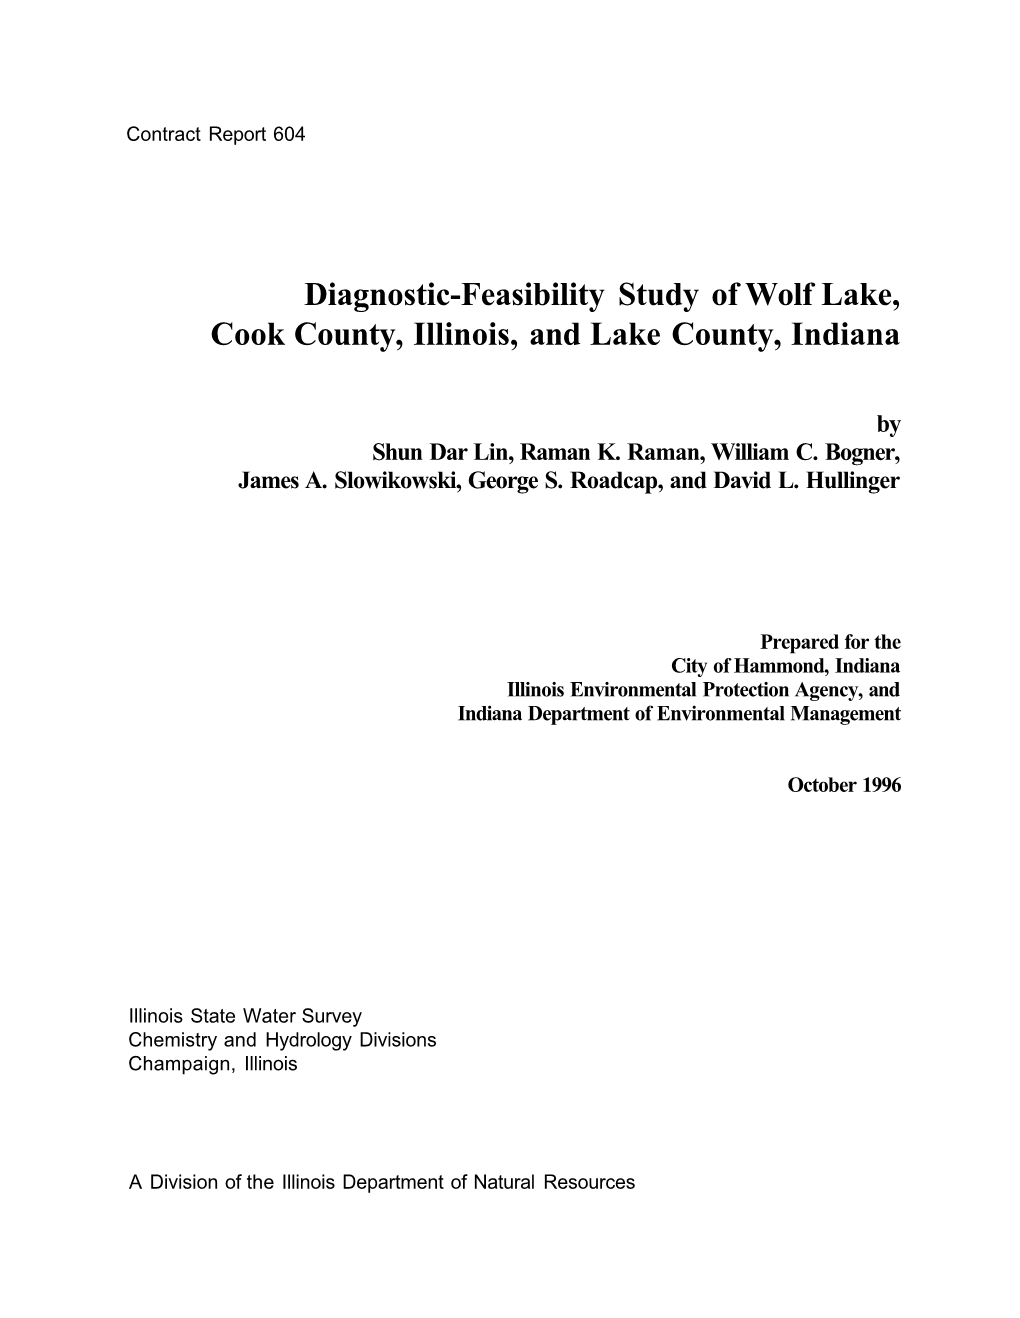 Diagnostic-Feasibility Study of Wolf Lake, Cook County, Illinois, and Lake County, Indiana